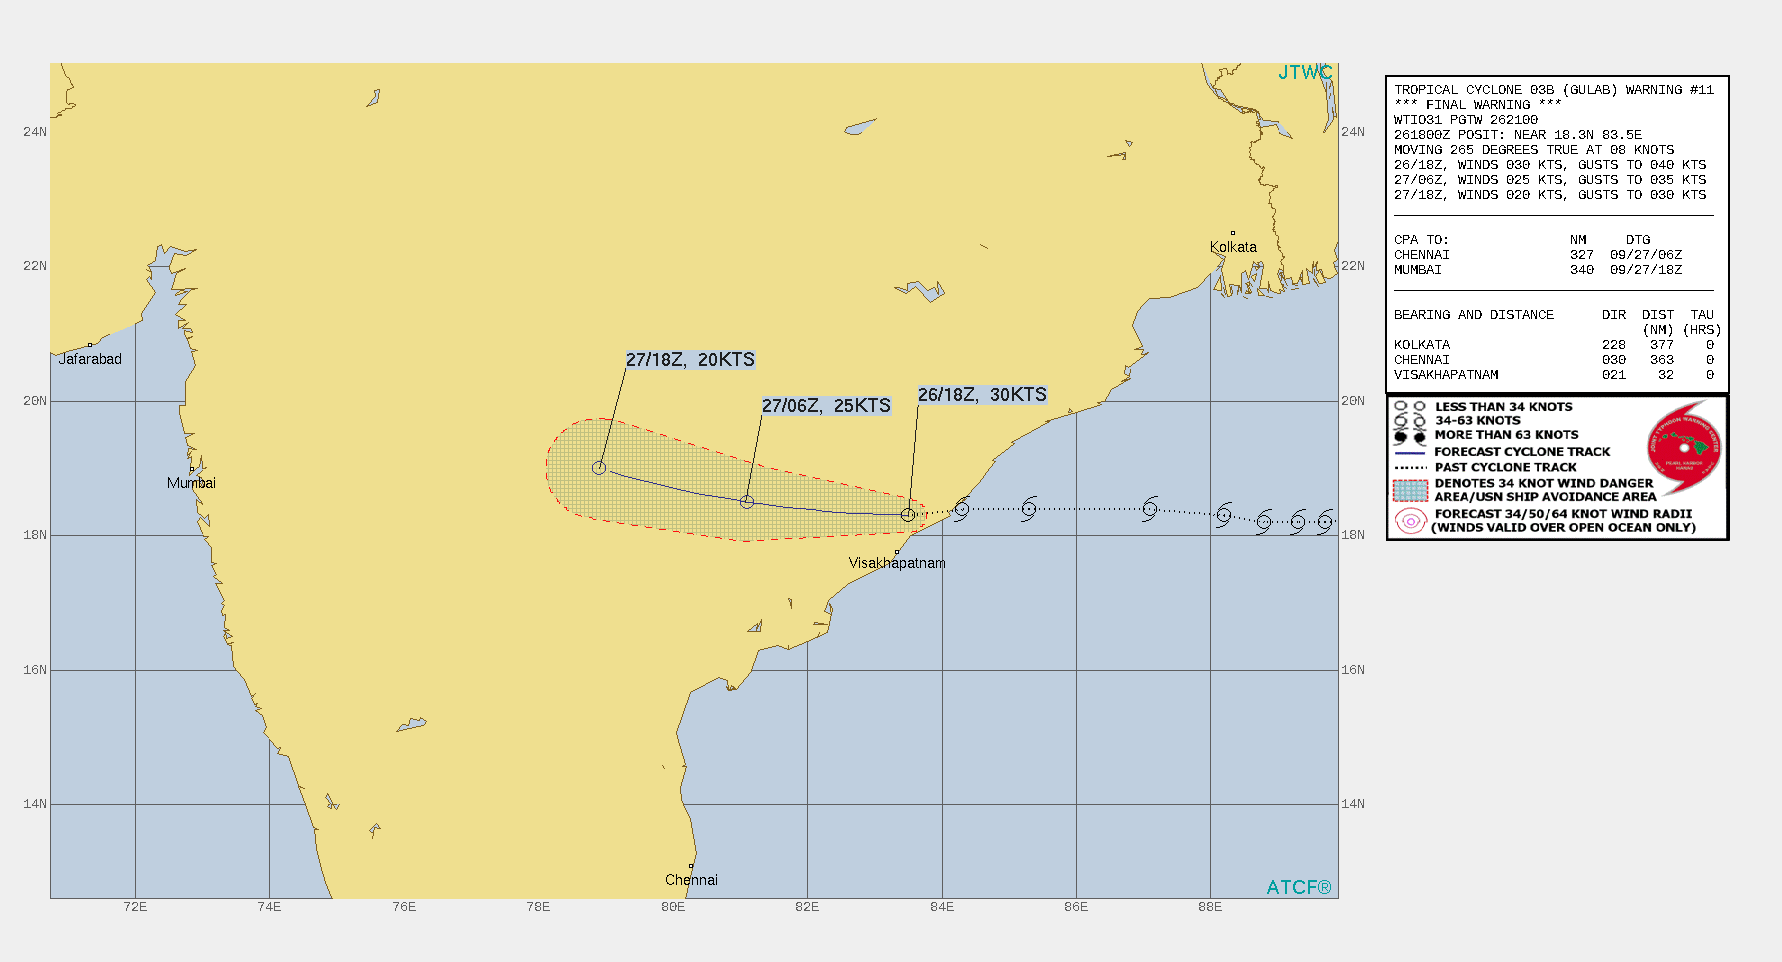 262100Z POSITION NEAR 18.4N 82.9E. 26SEP21. TROPICAL CYCLONE 03B (GULAB), LOCATED APPROXIMATELY 700KM SOUTHWEST OF KOLKATA, INDIA, HAS TRACKED WESTWARD AT 15 KM/H OVER THE PAST SIX HOURS. THE ENERGY ASSOCIATED WITH THE SYSTEM MAY CARRY OVER THE INDIAN SUBCONTINENT AND INTO THE NORTH ARABIAN SEA AT SOME POINT. THERE IS GREAT UNCERTAINTY WHERE  PRECISELY THE VORTEX MIGHT RE-EMERGE INTO OPEN WATERS AND THE  INTENSITY AT WHICH IT MIGHT DO SO, SO JTWC WILL CONTINUE TRACKING  THE SYSTEM BUT FOREGO WARNINGS UNTIL SUCH TIME AS CONDITIONS  WARRANT. THIS IS THE FINAL WARNING ON THIS SYSTEM BY THE JOINT  TYPHOON WRNCEN PEARL HARBOR HI. THE SYSTEM WILL BE CLOSELY MONITORED  FOR SIGNS OF REGENERATION.